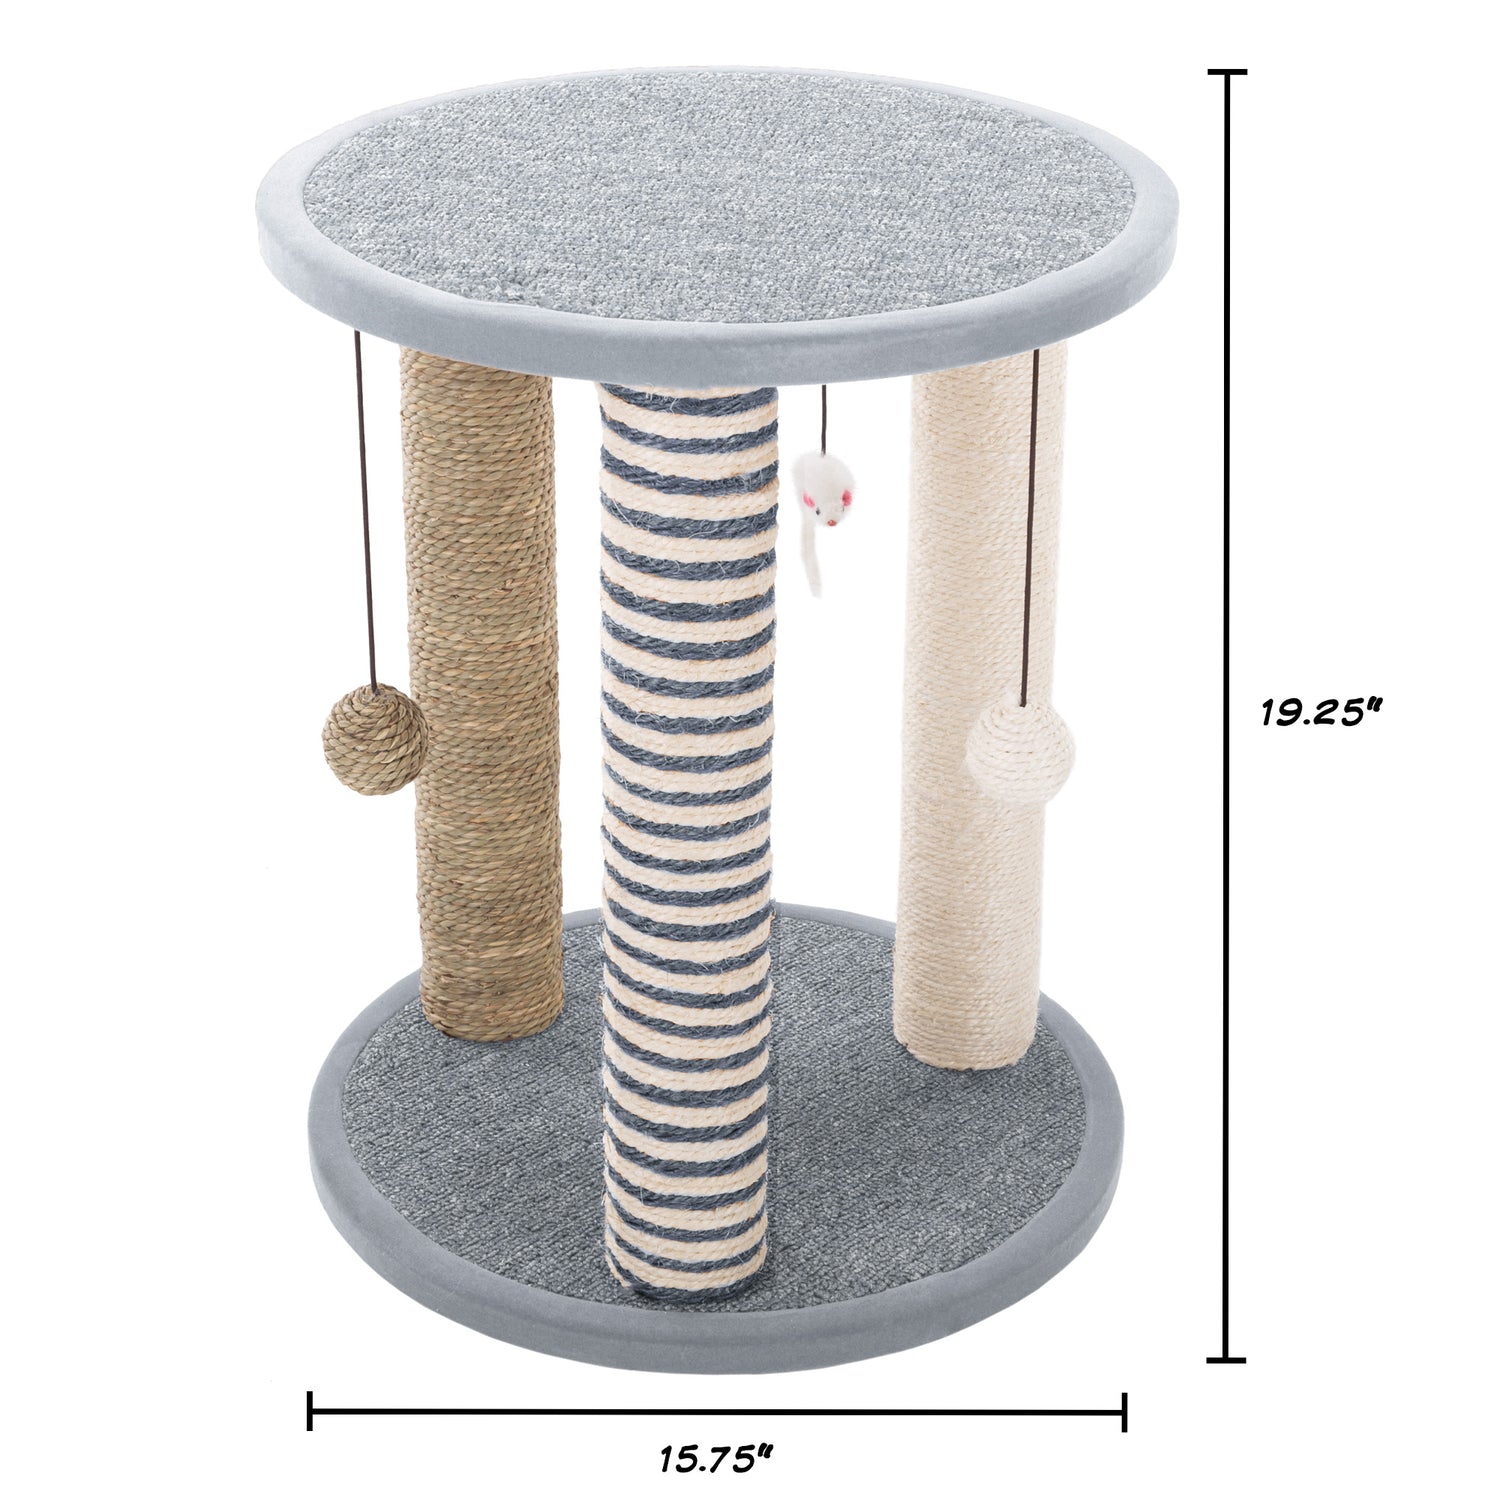 Cat Tower with 3 Scratching Posts, Carpeted Base Play Area and Perch – Furniture Scratching Deterrent Tree for Indoor Cats by PETMAKER (Gray)